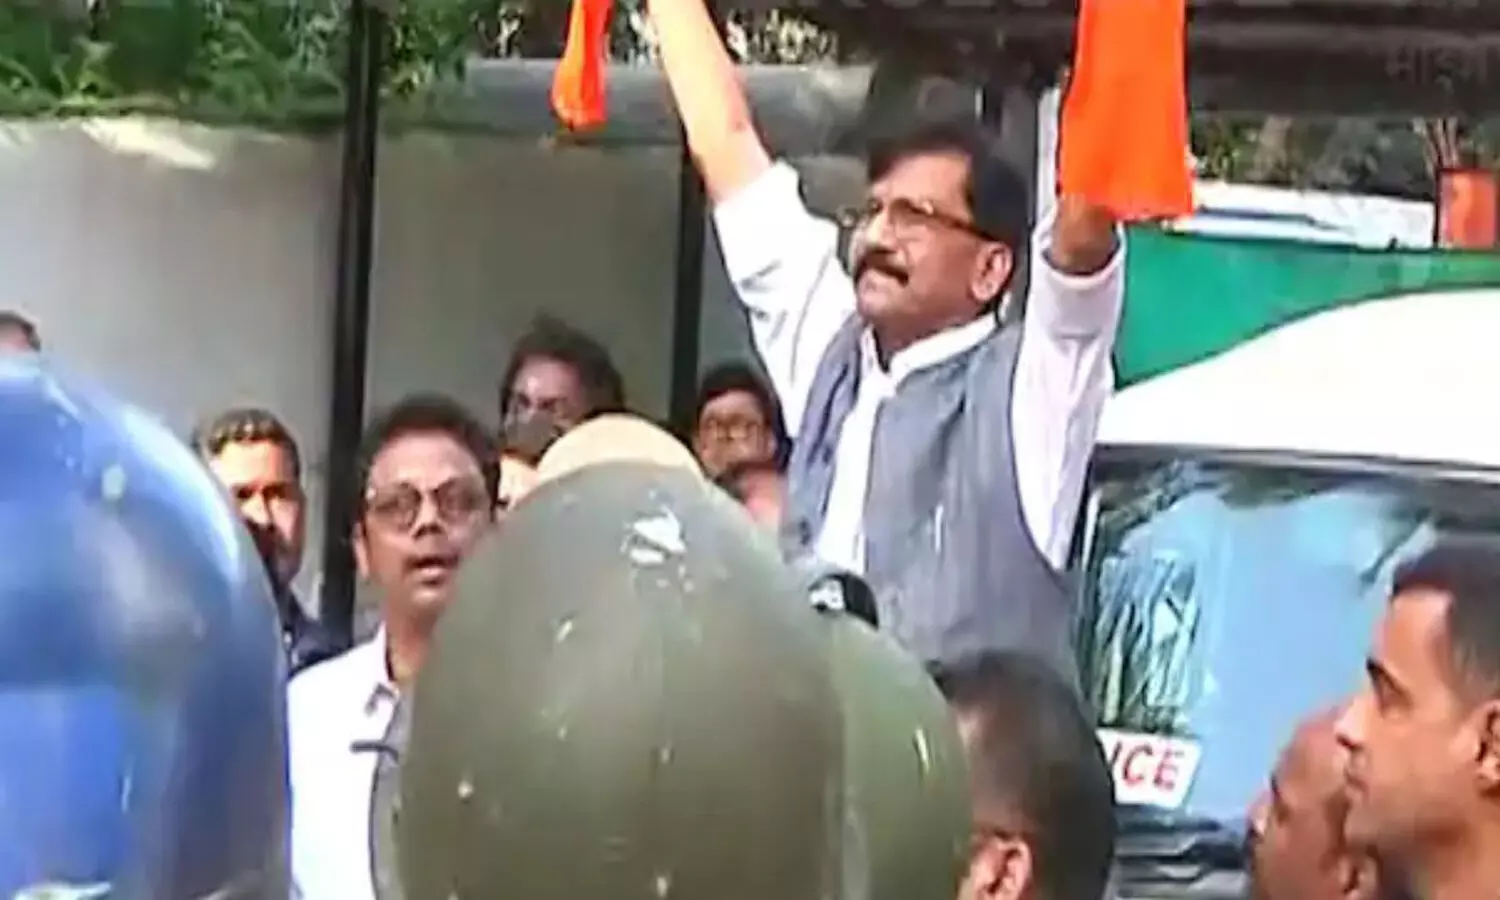 Sanjay Raut wont be cowed down, says Sena MP as ED detains him in chawl scam